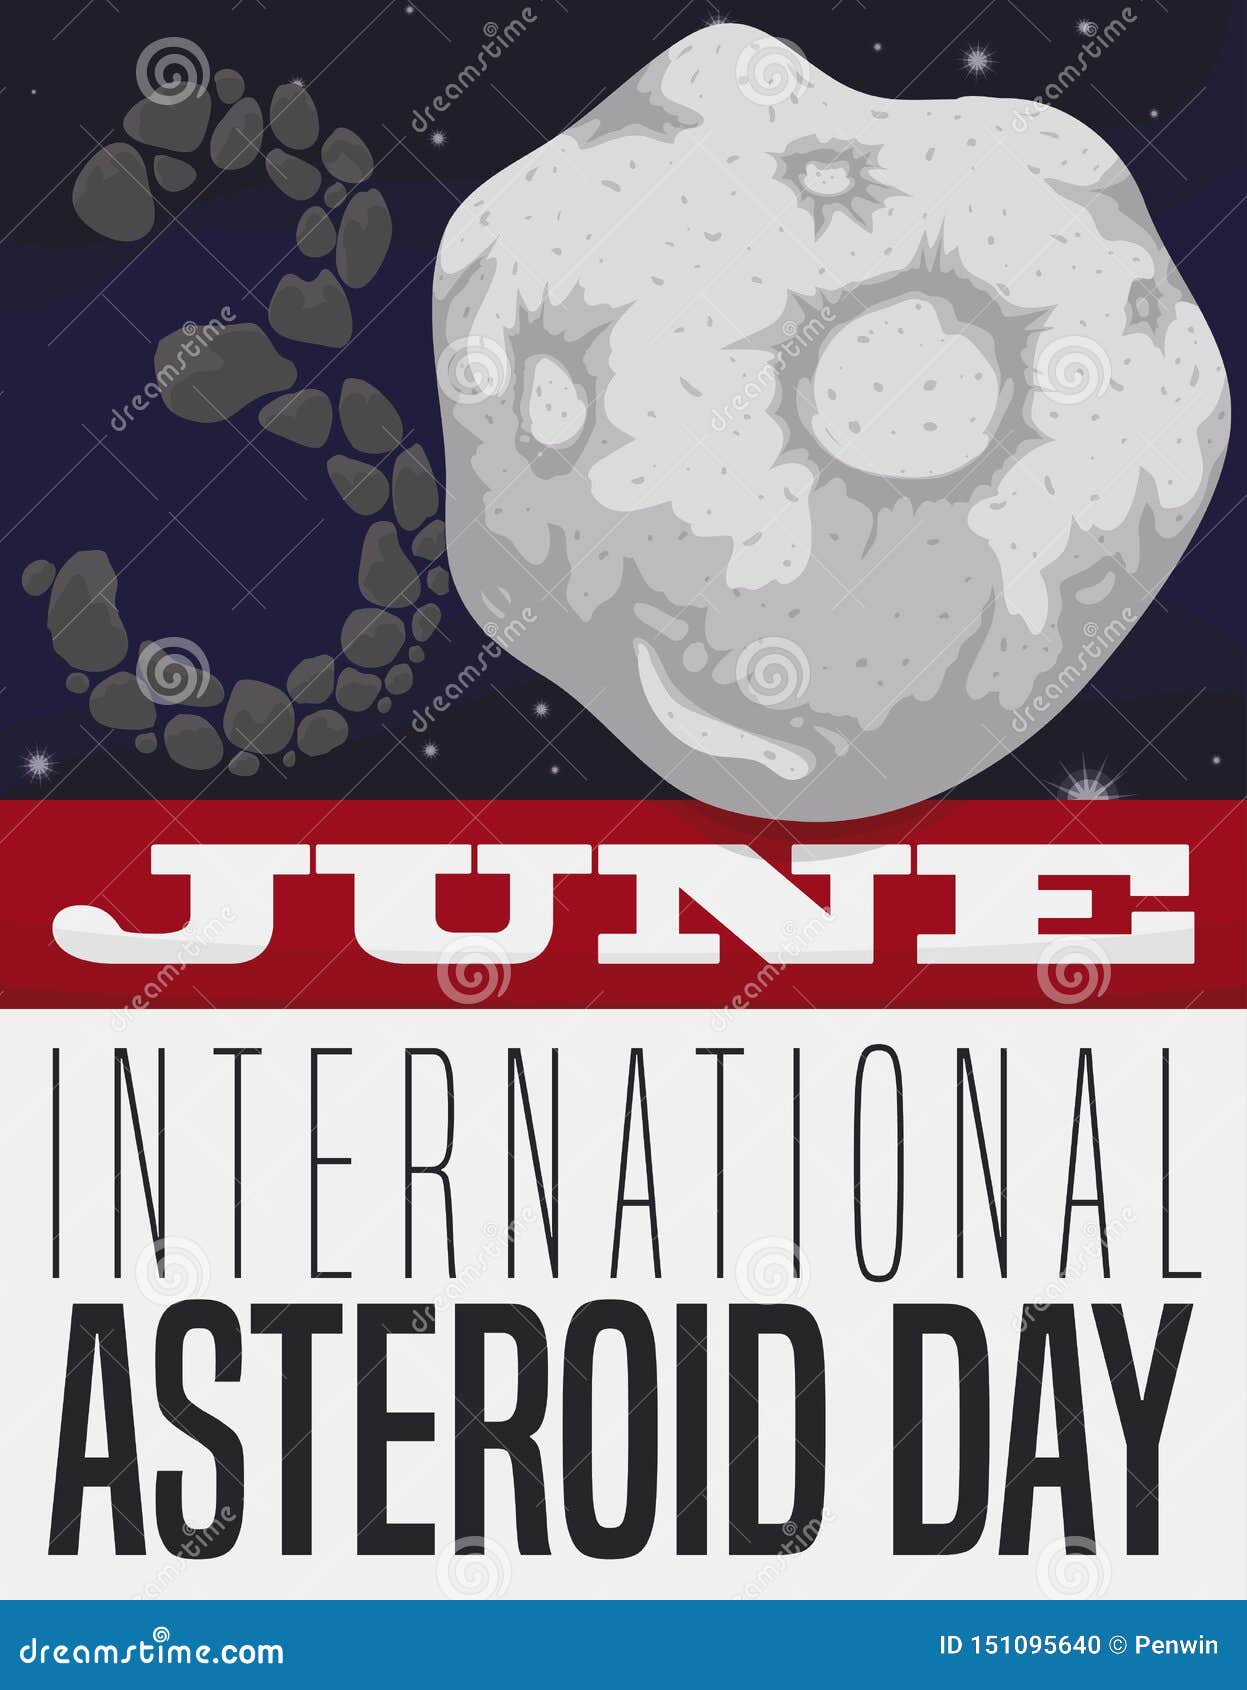 Reminder Calendar with Space View for International Asteroid Day